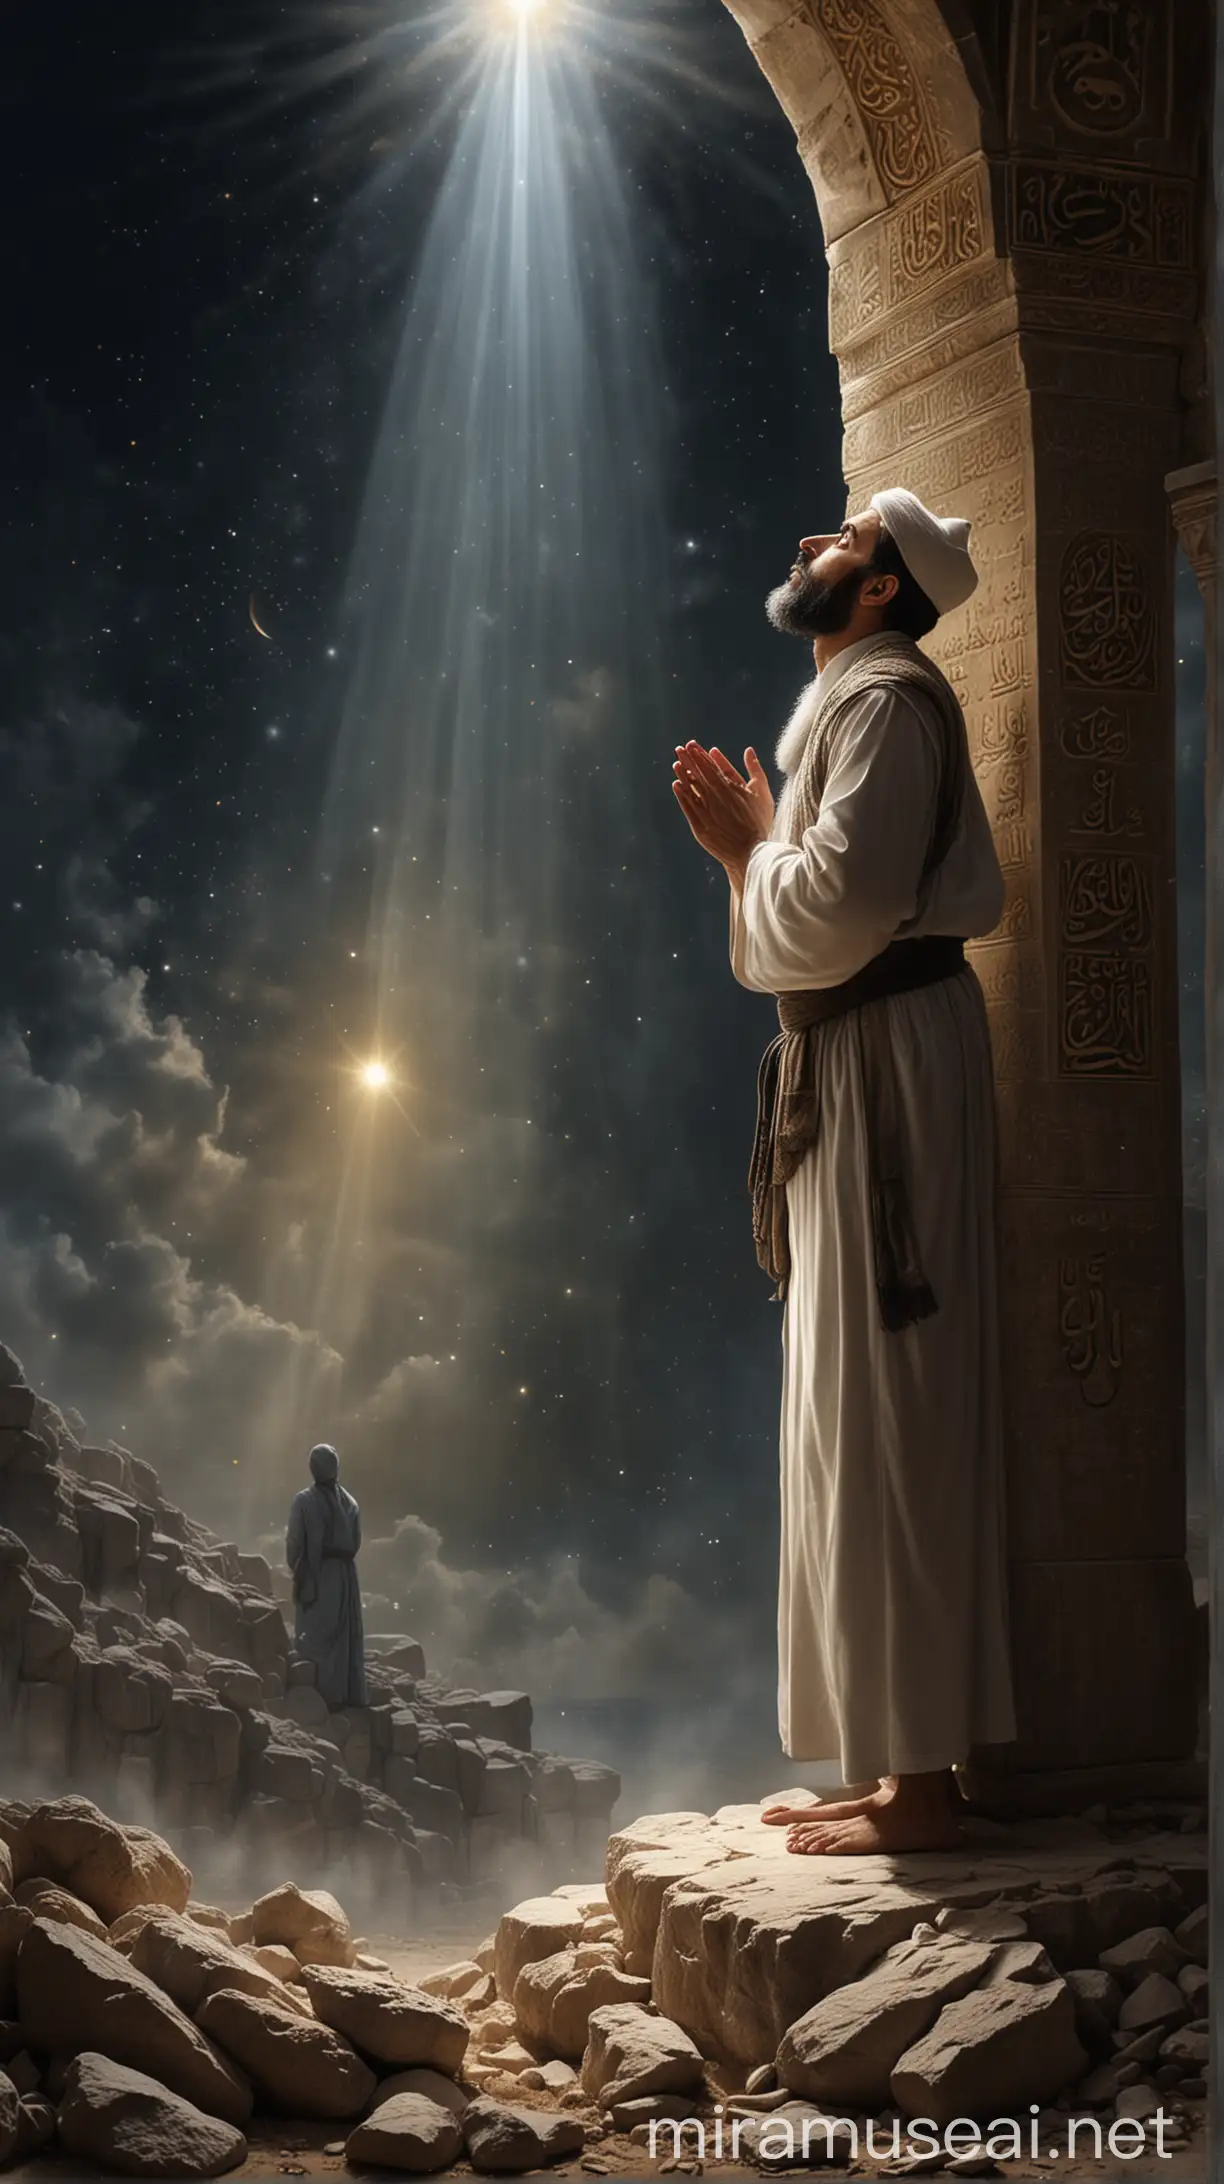 A scene where a man looks up at the sky while praying. In the background, there is a shining light and the appearance of a figure representing the longed-for sight of Hızır Aleyhisselam.
 ISLAM